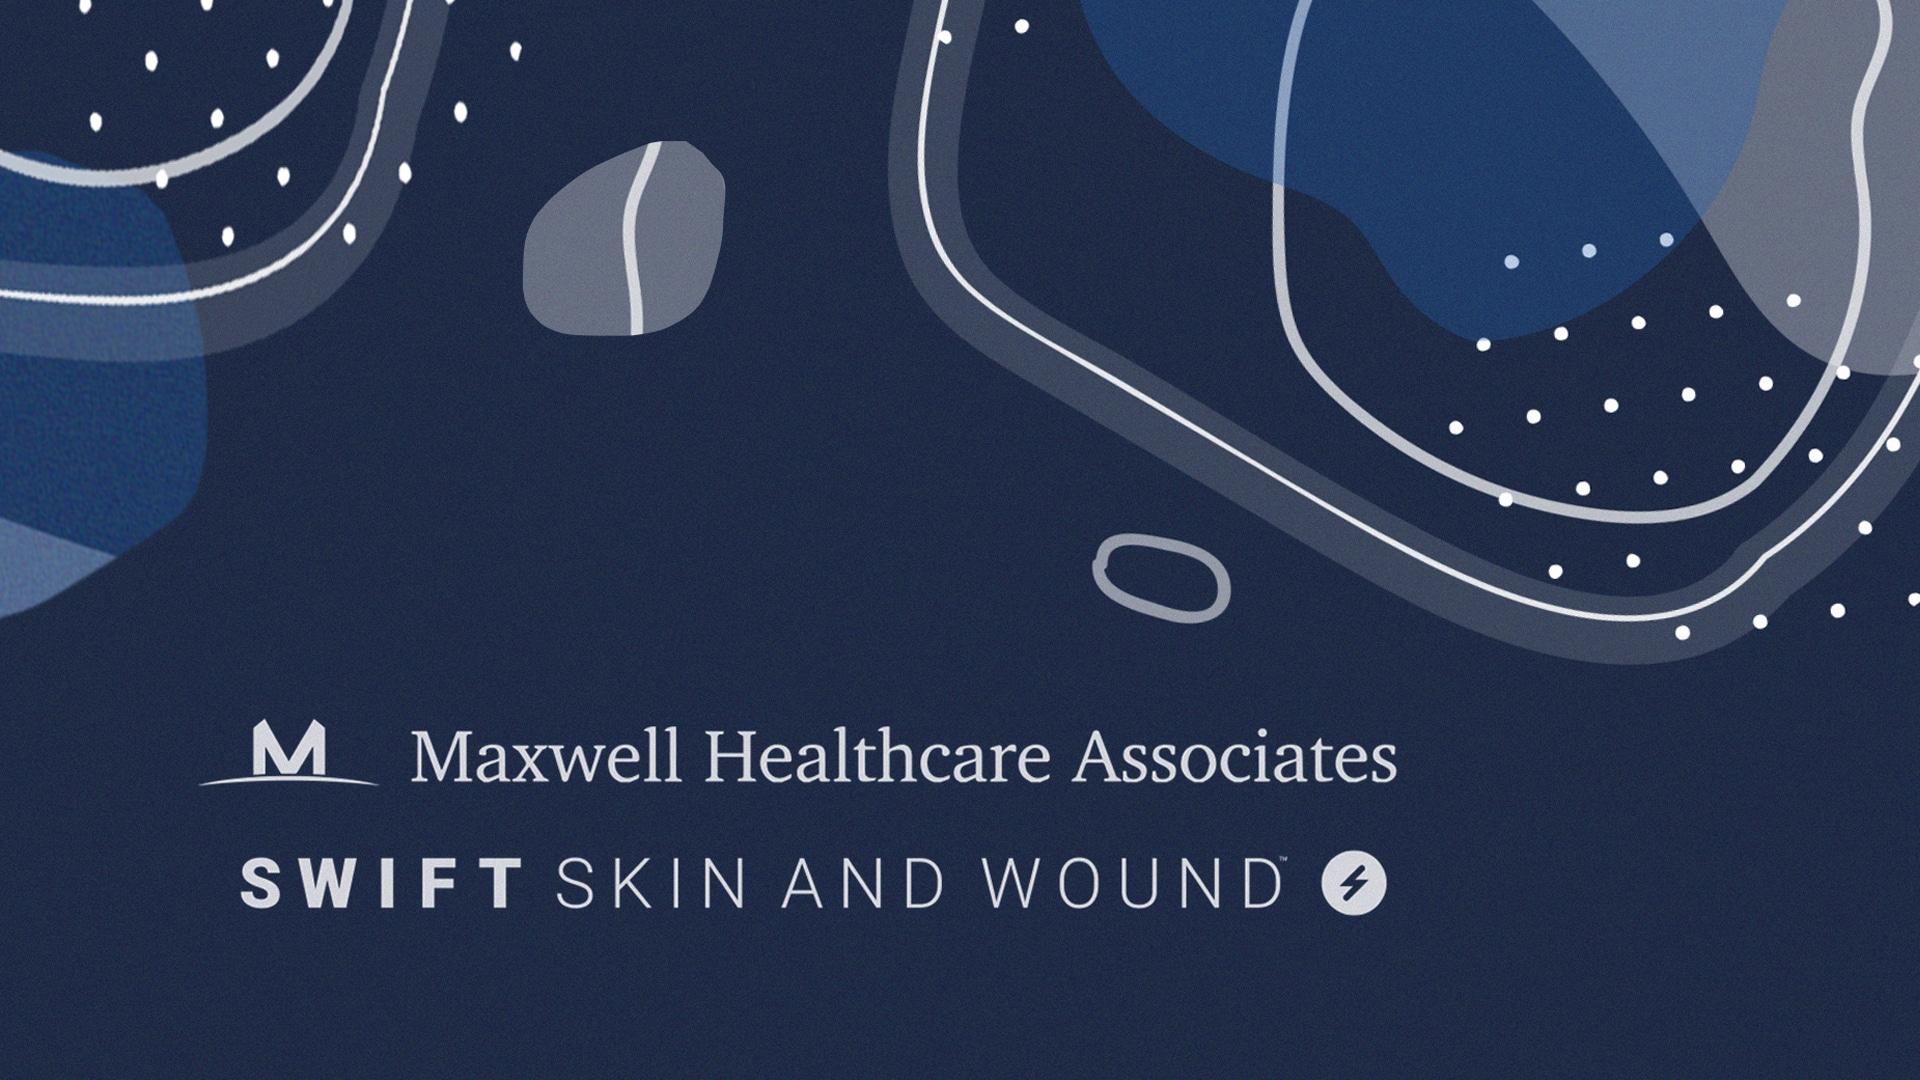 Maxwell Healthcare Associates and Swift Skin and Wound